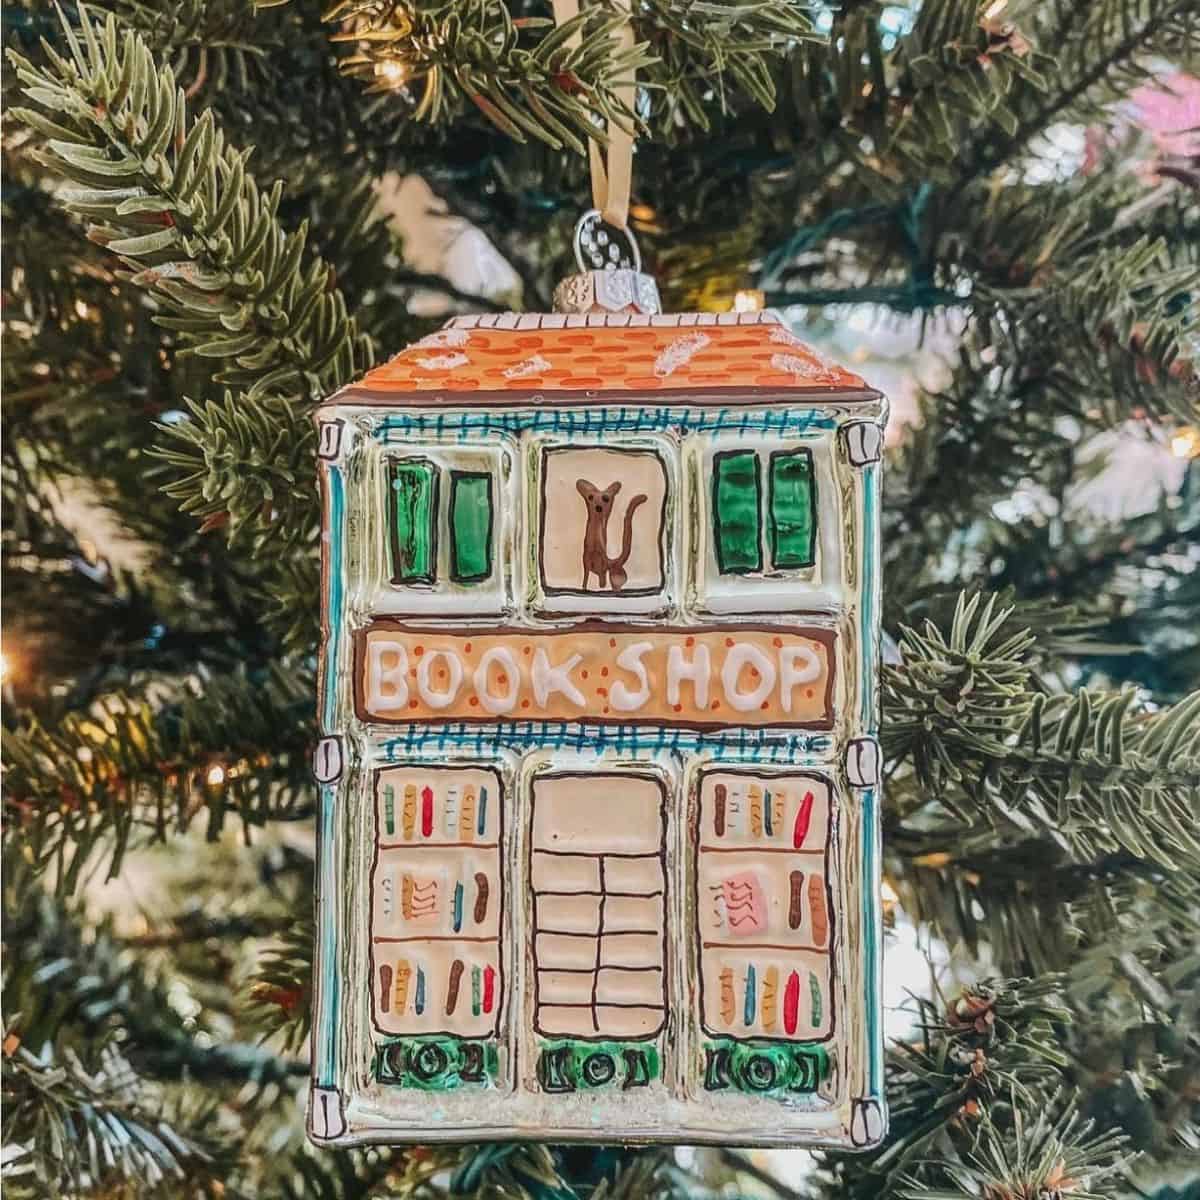 blown glass bookshop ornament in front of a tree.